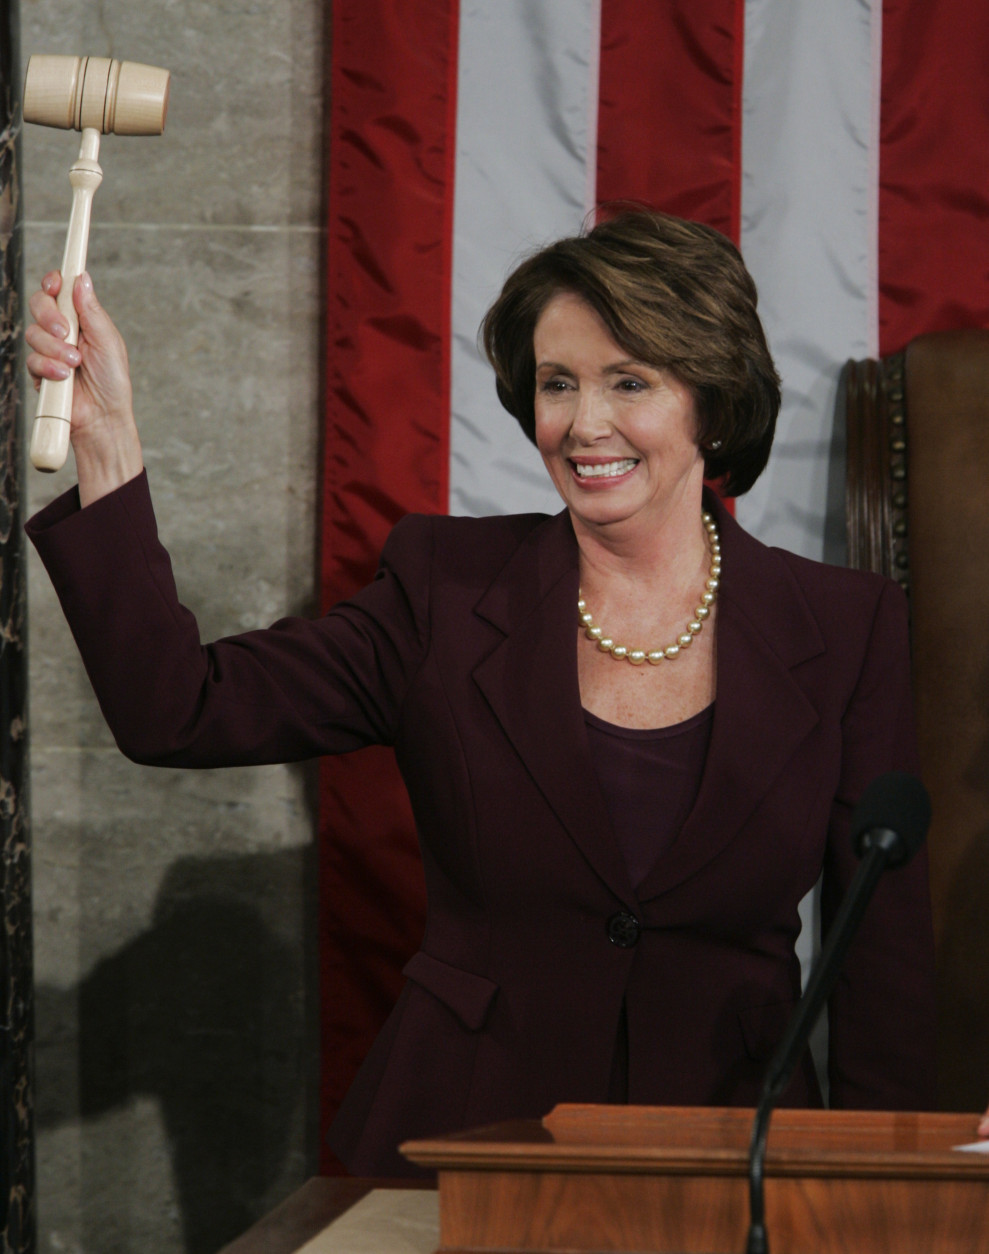 Newly elected Speaker of the House Nancy Pelosi, holds up the gavel in the U.S. Capitol in Washington Thursday, Jan. 4, 2007. (AP Photo/Pablo Martinez Monsivais)